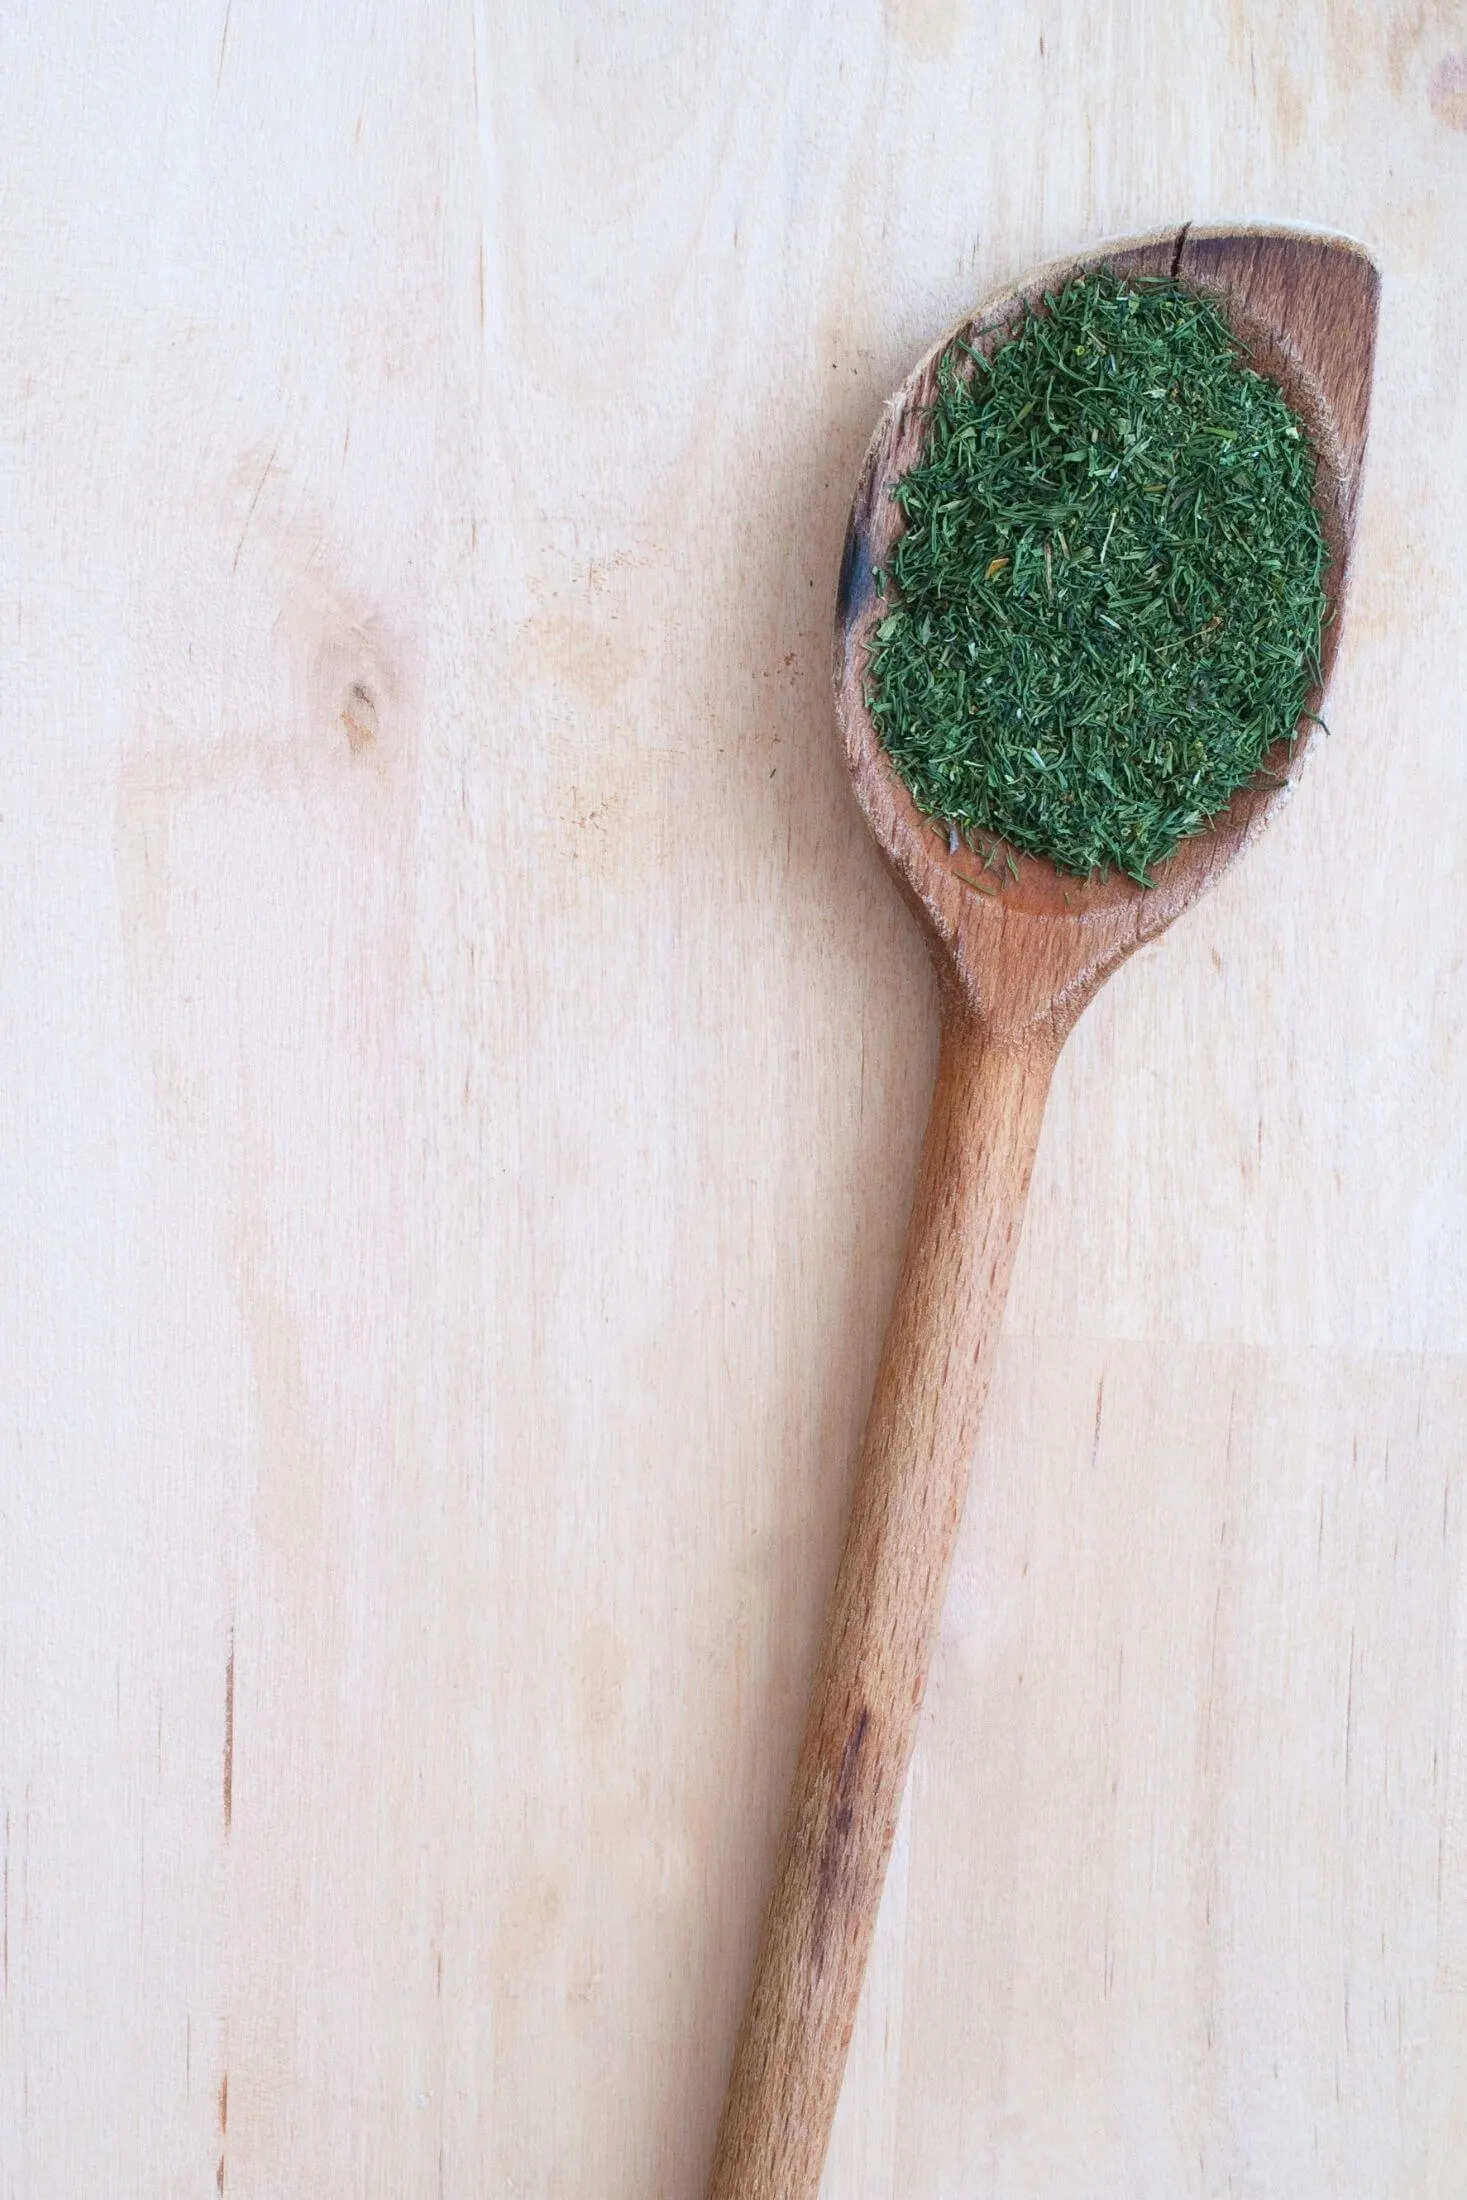 Dried dill in a wooden spoon.